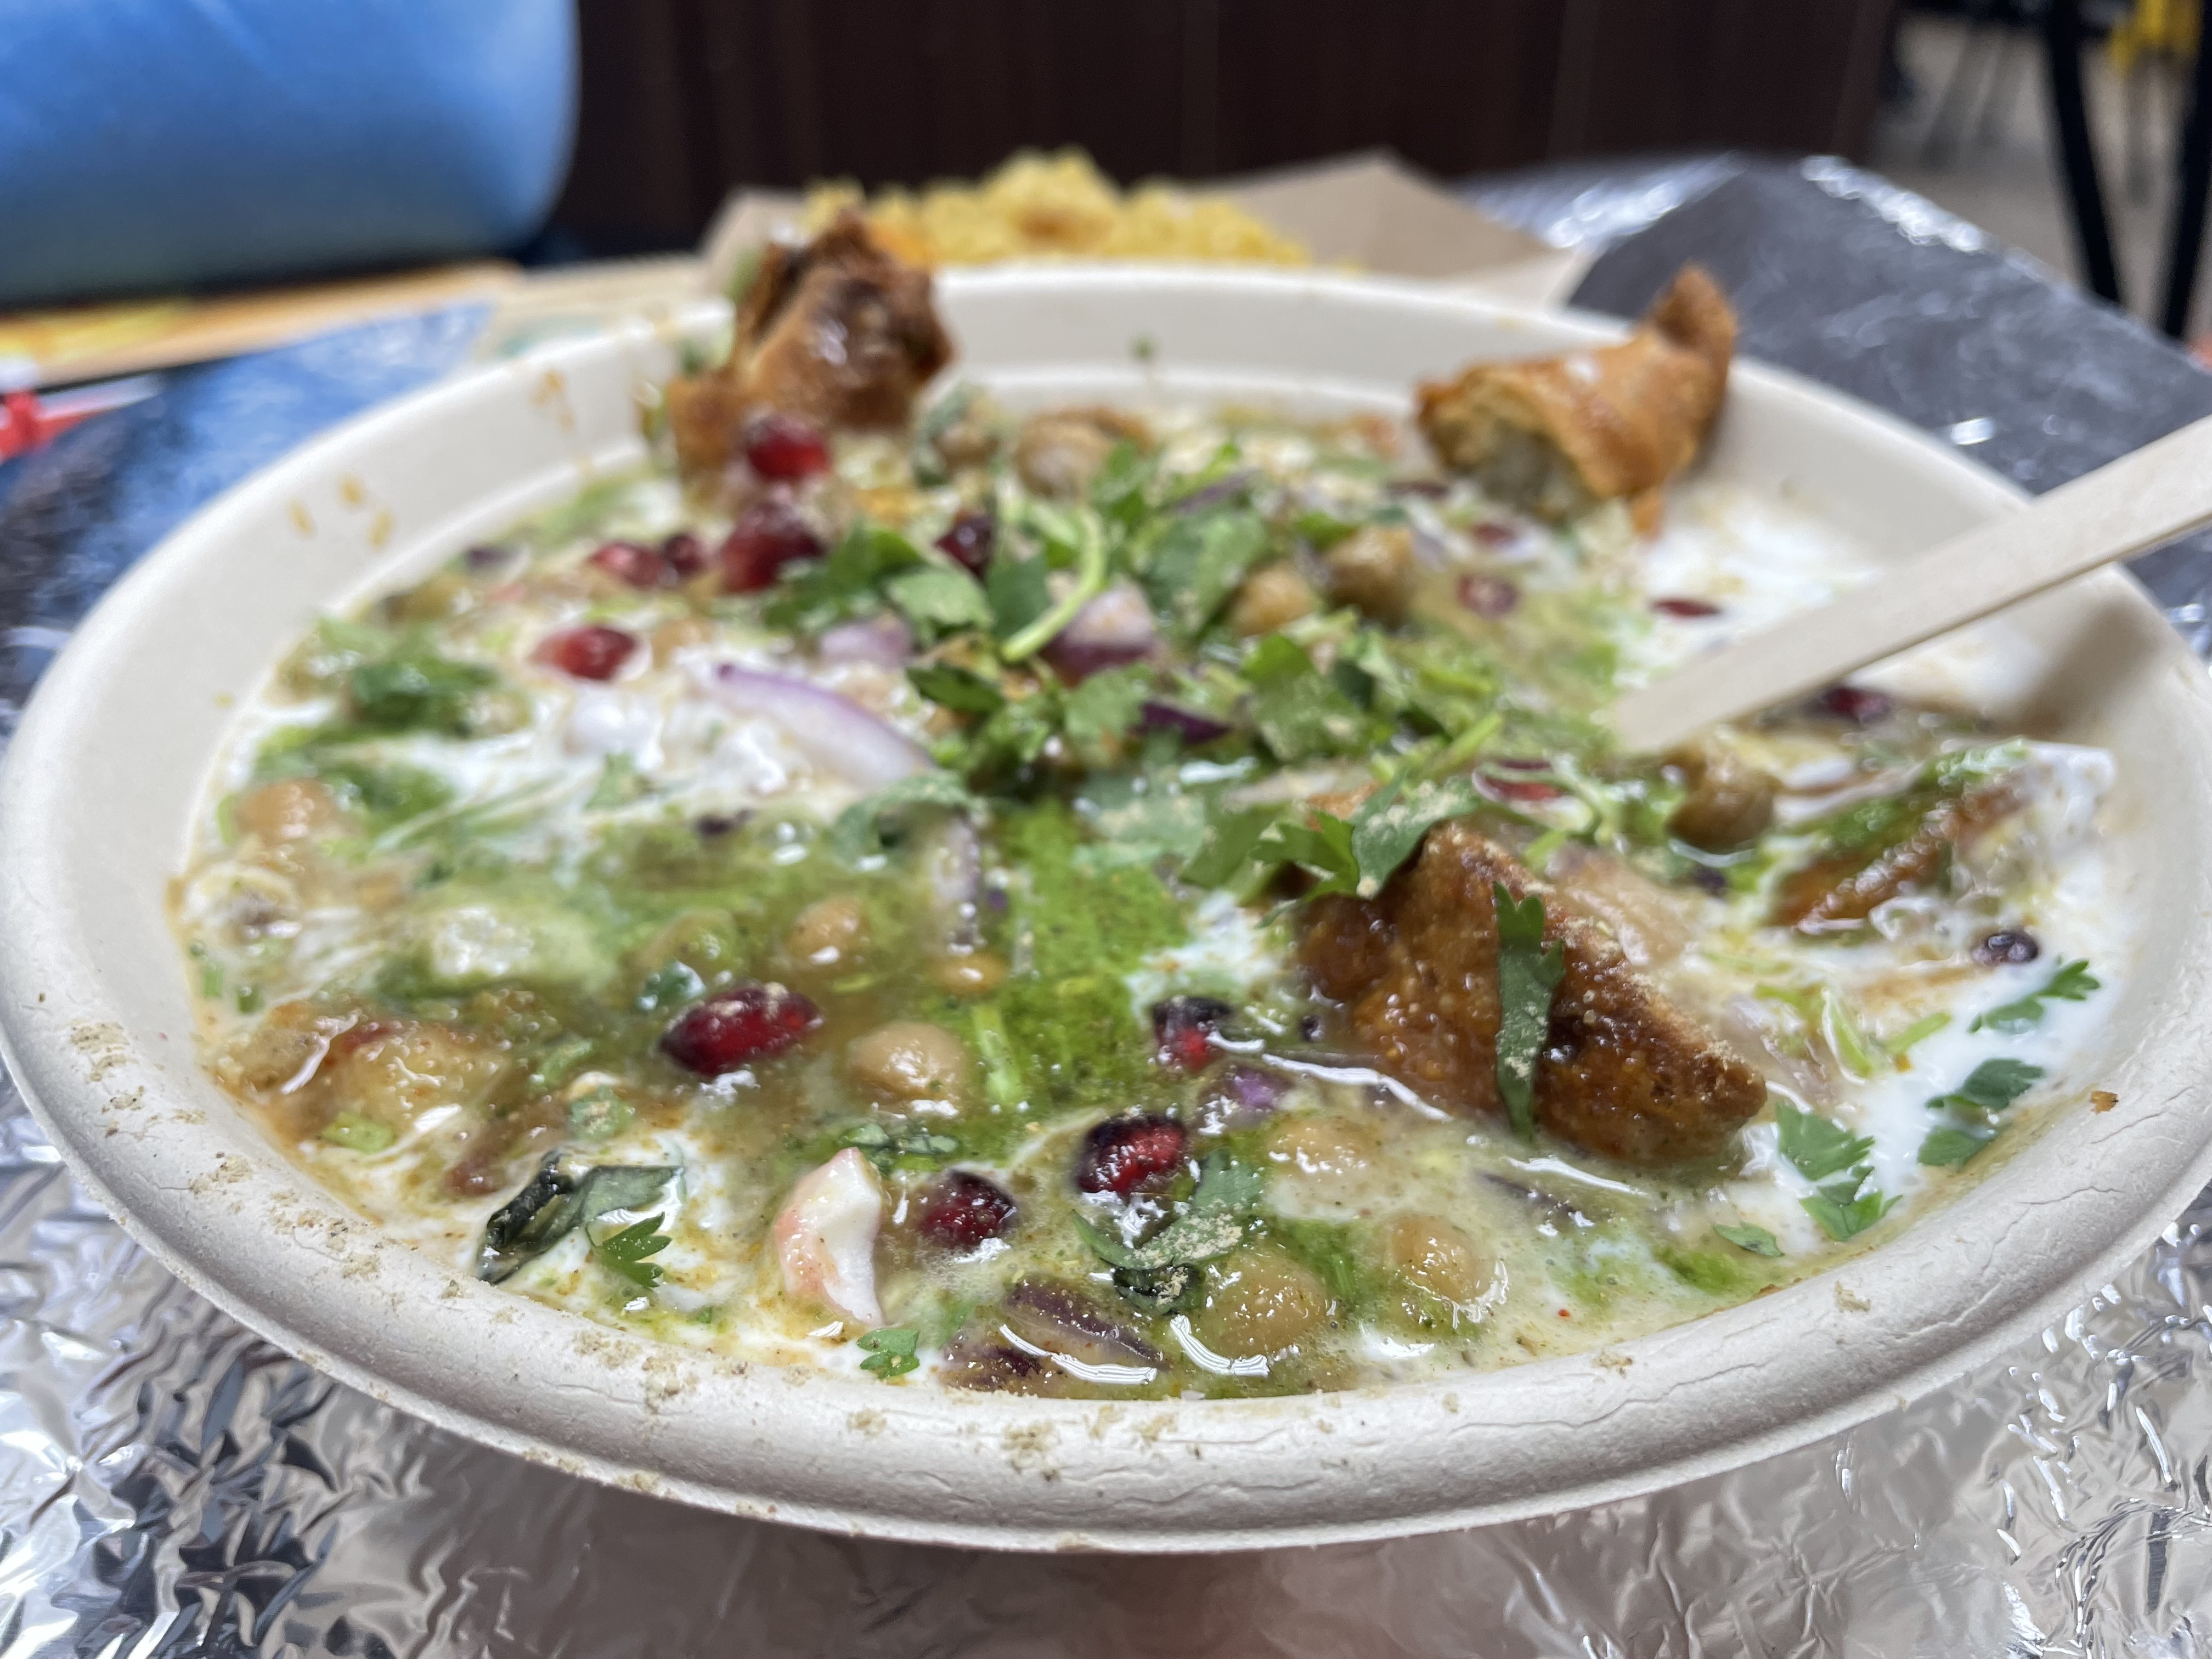 Samosa chaat is a dish made with chickpeas, crispy samosa, assorted sweet and spicy chutneys and crunchy toppings